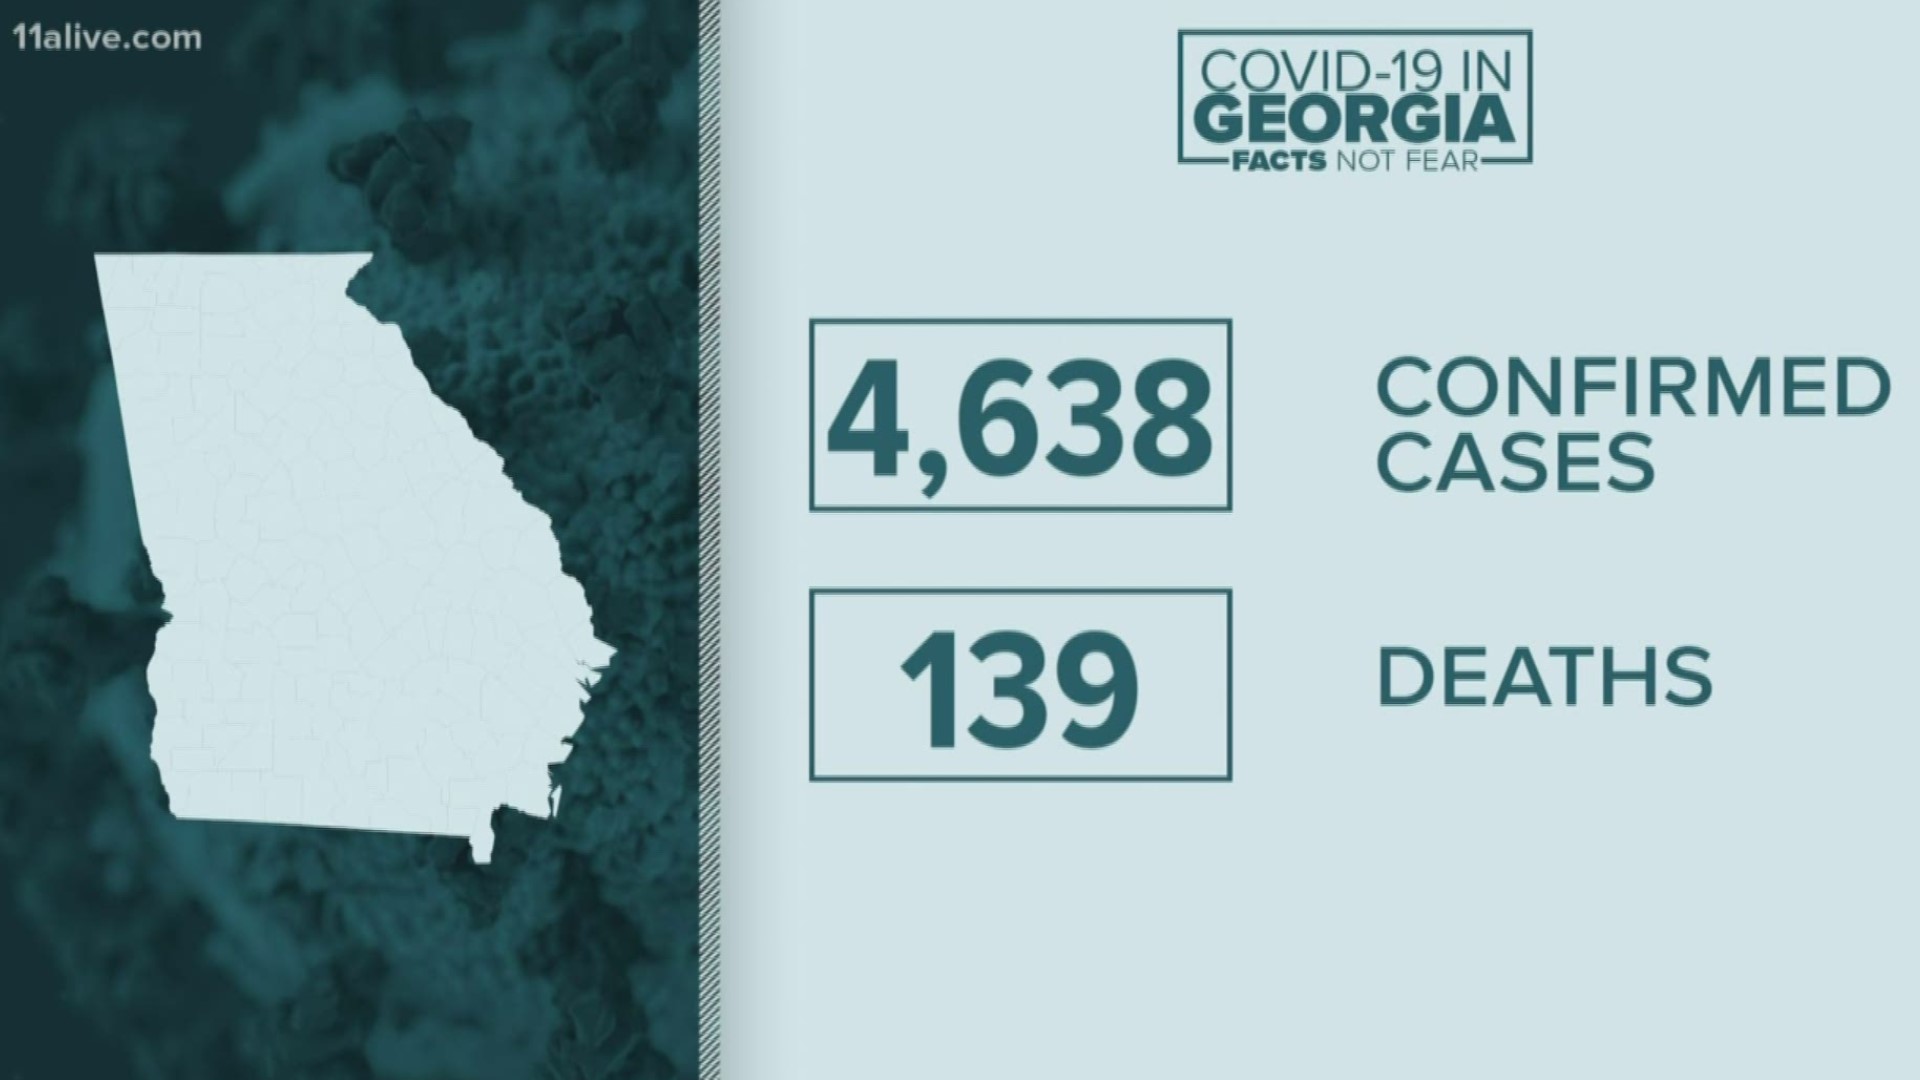 952 people are hospitalized for COVID-19 in Georgia so far.